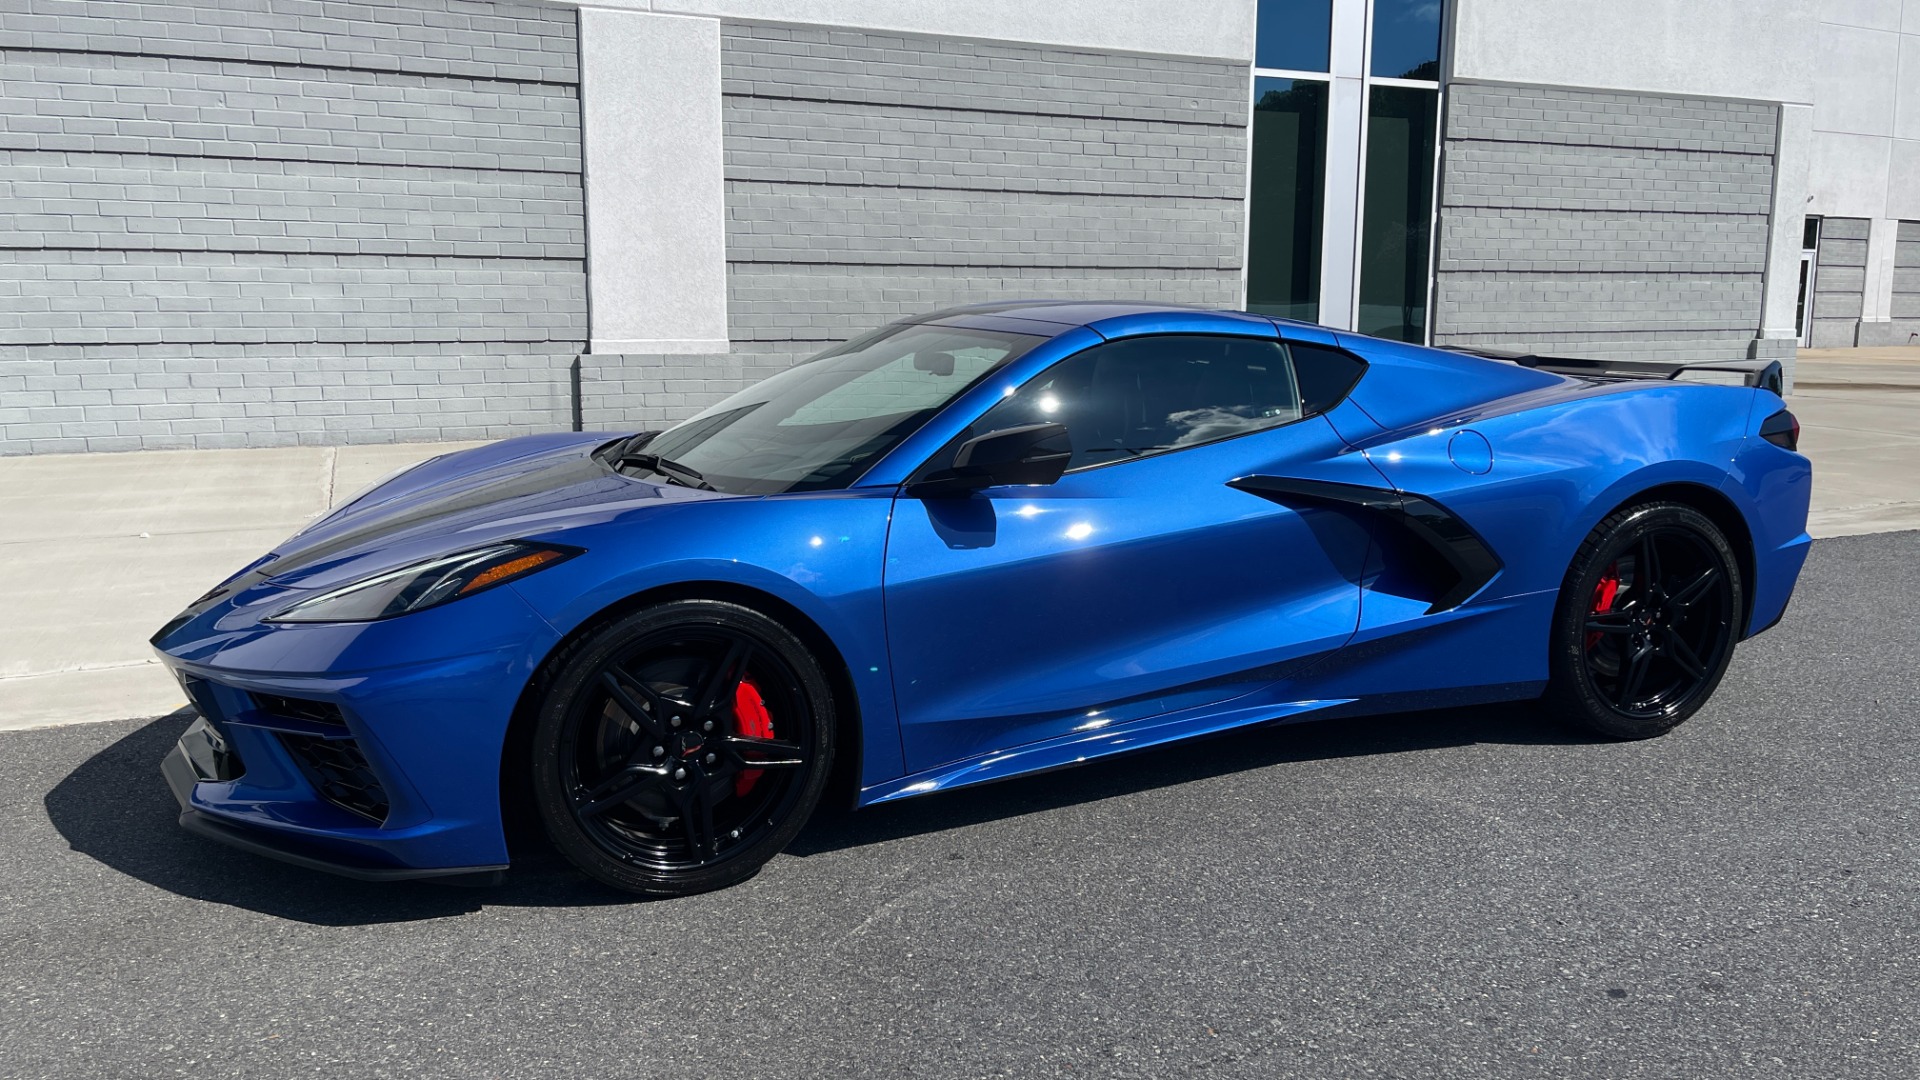 Used 2021 Chevrolet CORVETTE STINGRAY 3LT COUPE / 8-SPD / PERF PKG / NAV / BOSE / REARVIEW for sale Sold at Formula Imports in Charlotte NC 28227 4